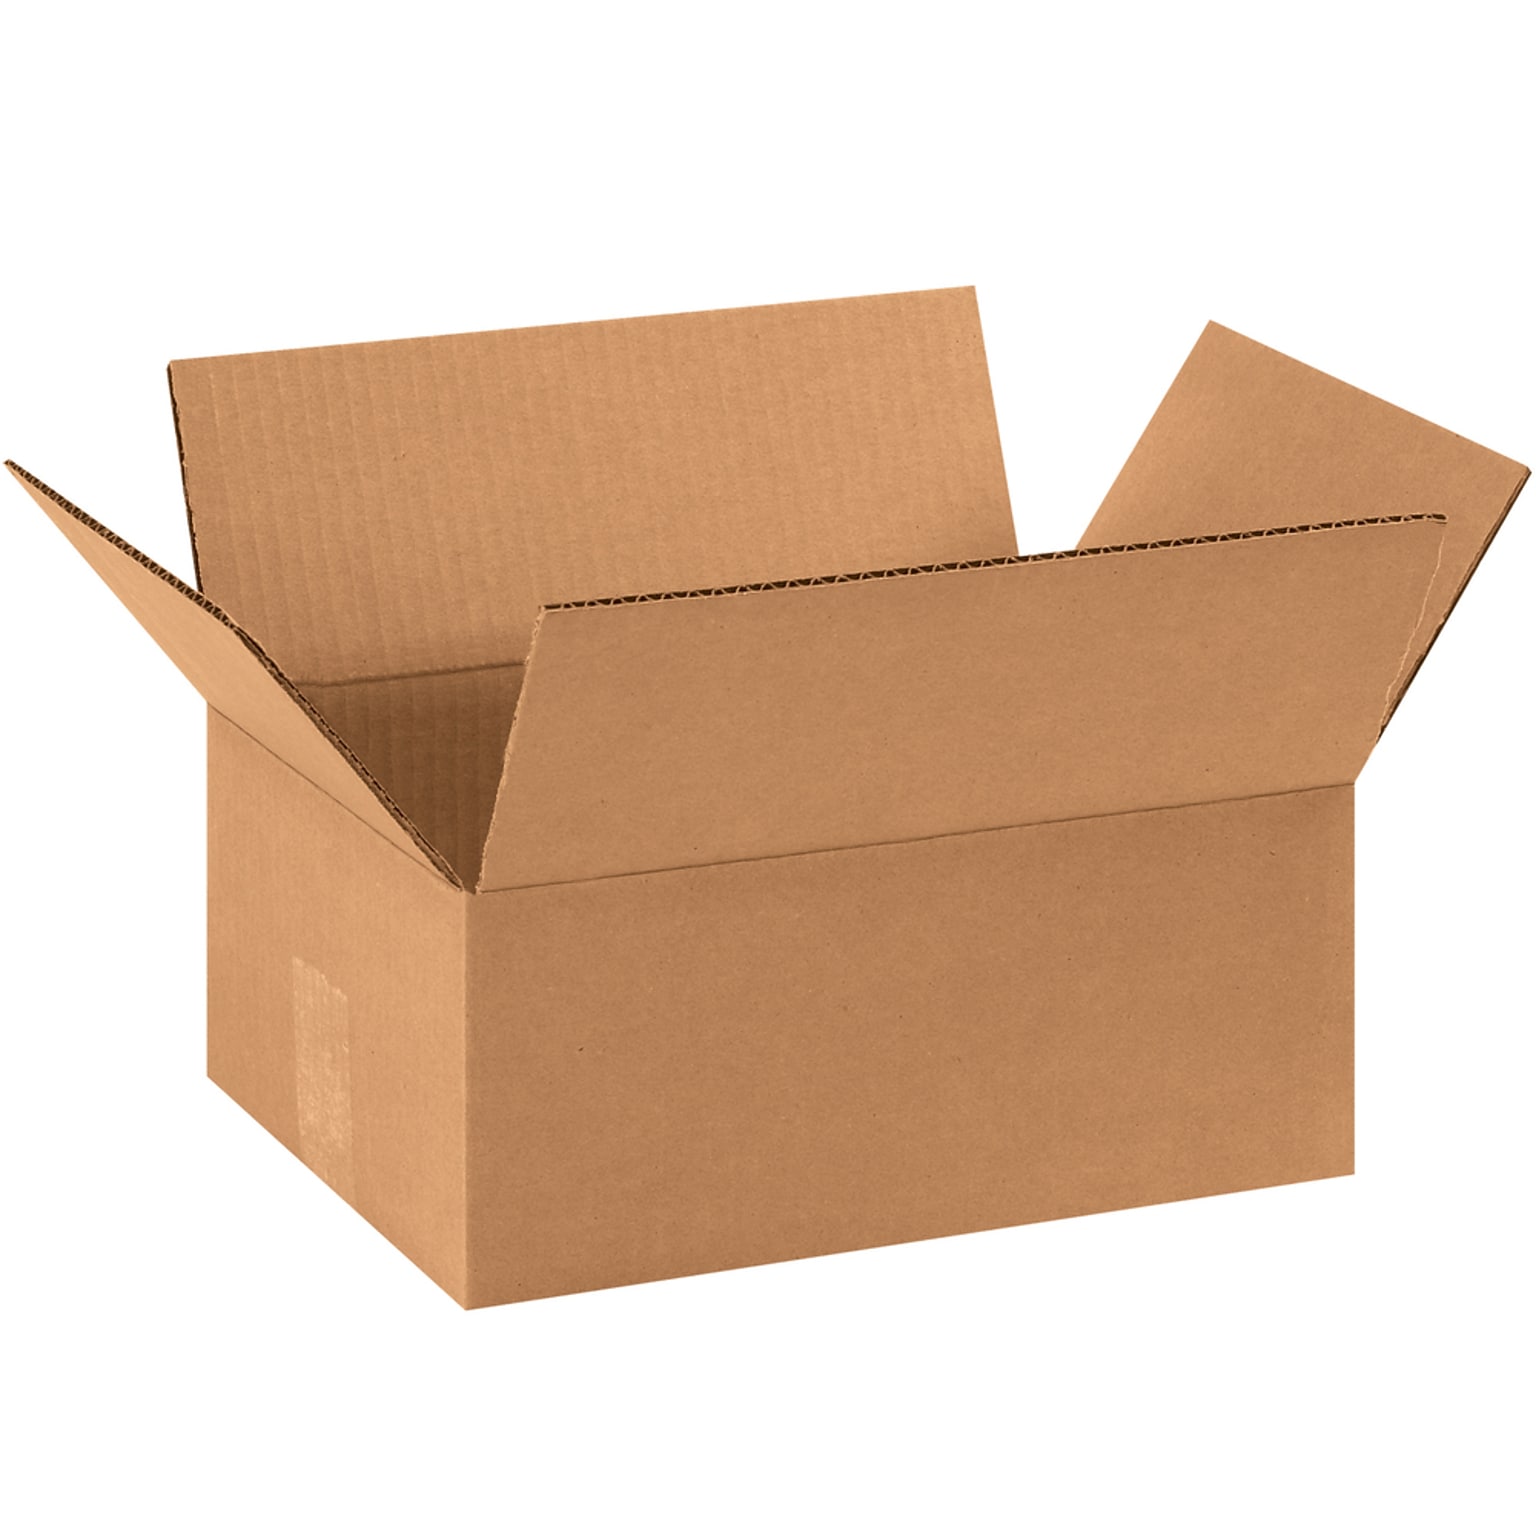 Quill Brand 11.75 x 8.75 x 4.75 Corrugated Shipping Boxes, 200#/ECT-32 Mullen Rated Corrugated, Pack of 25, (1184SC)